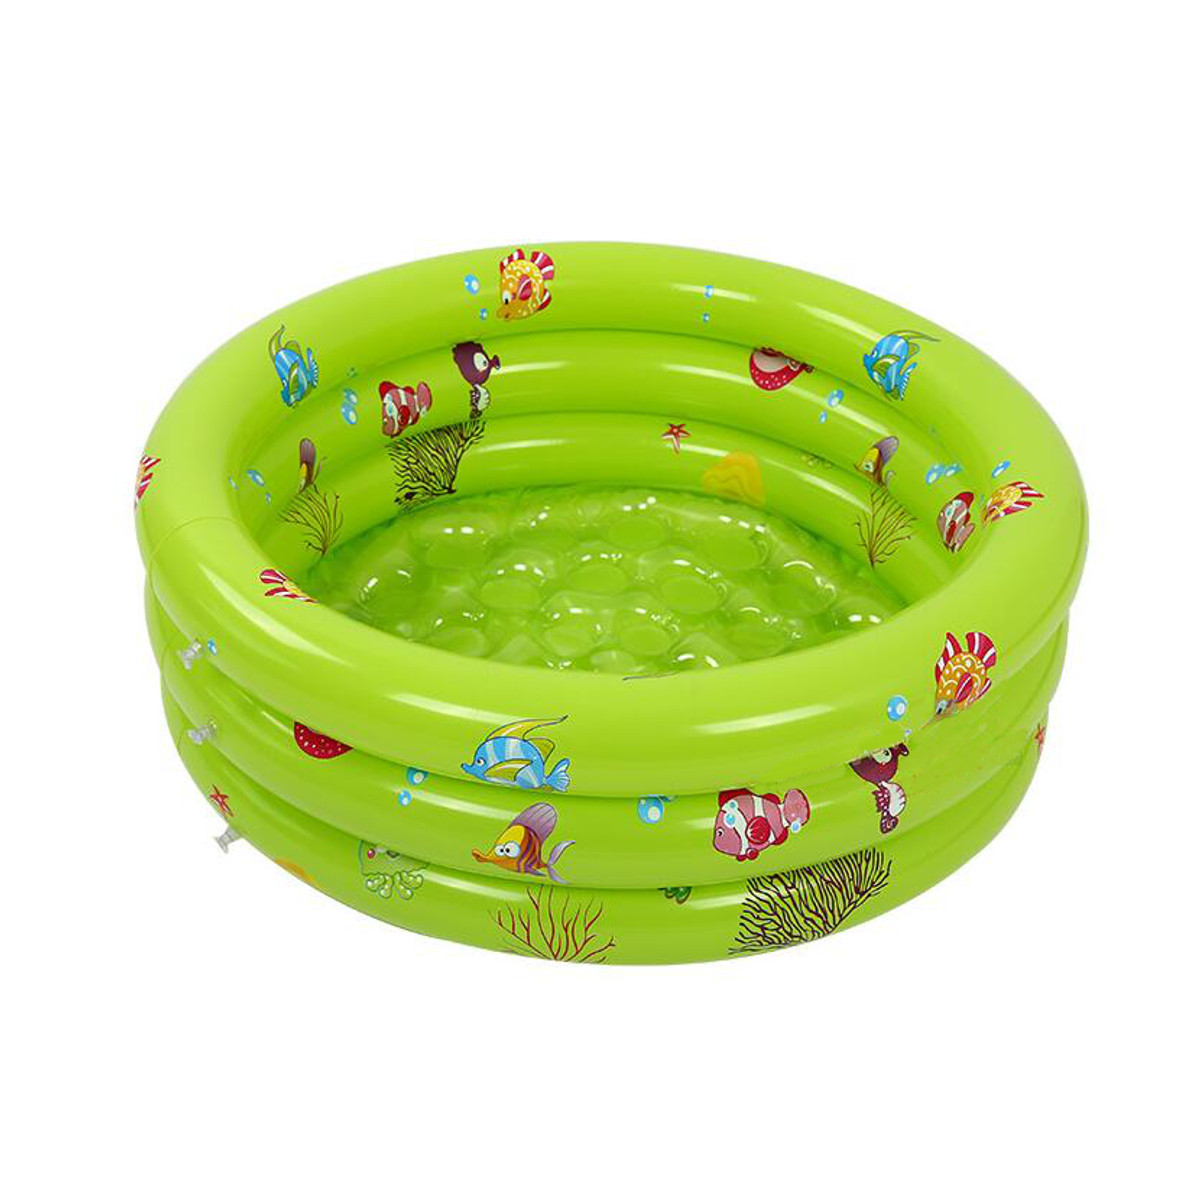 80CM 3 Ring Inflatable Round Swimming Pool Toddler Children Kids Outdoor Play Balls